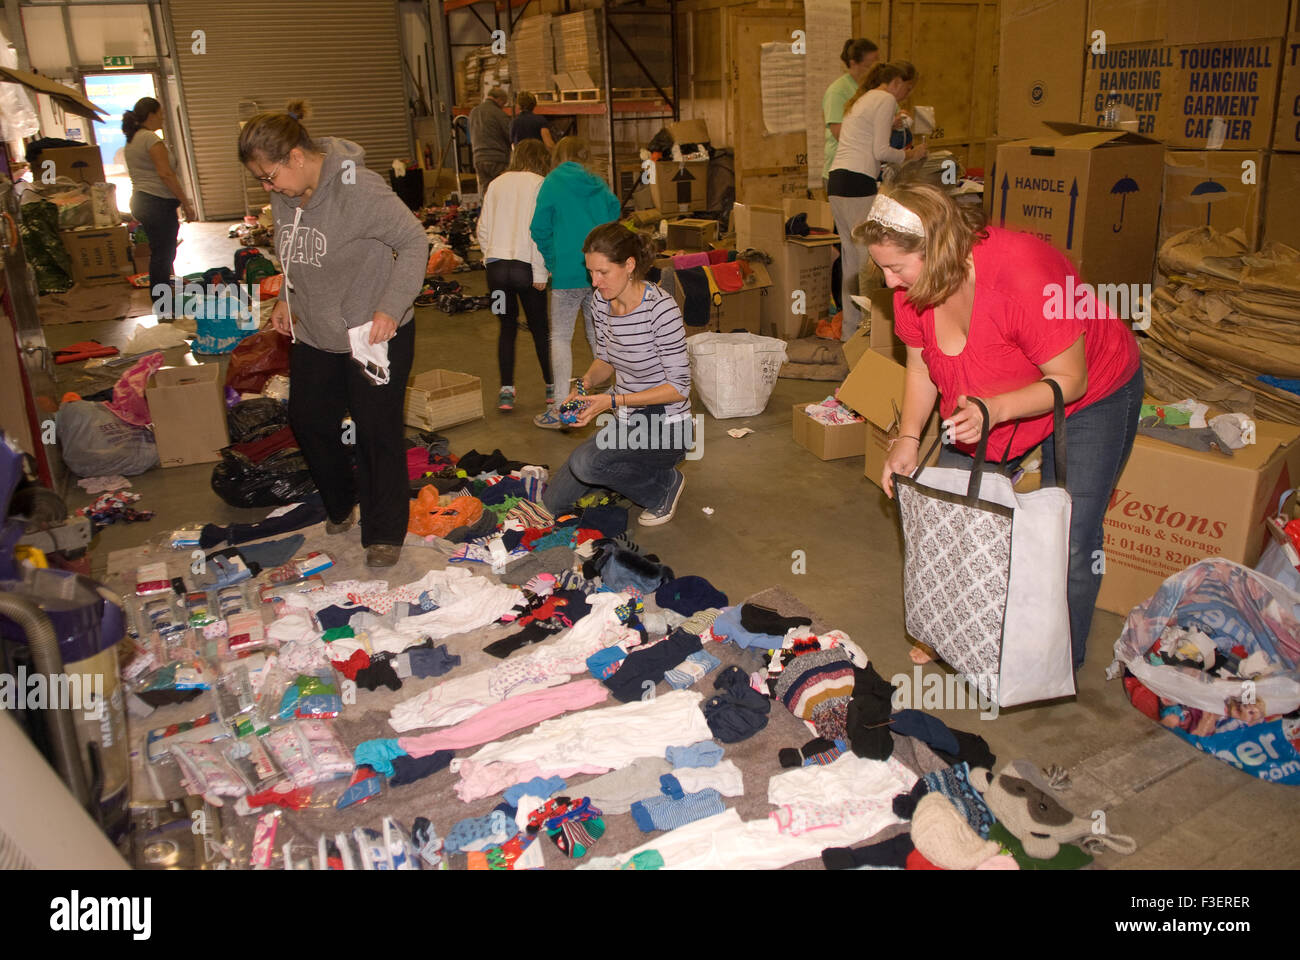 Volunteers in a removal company's warehouse sorting and packing up donated items of clothing and other non-perishable items for... Stock Photo